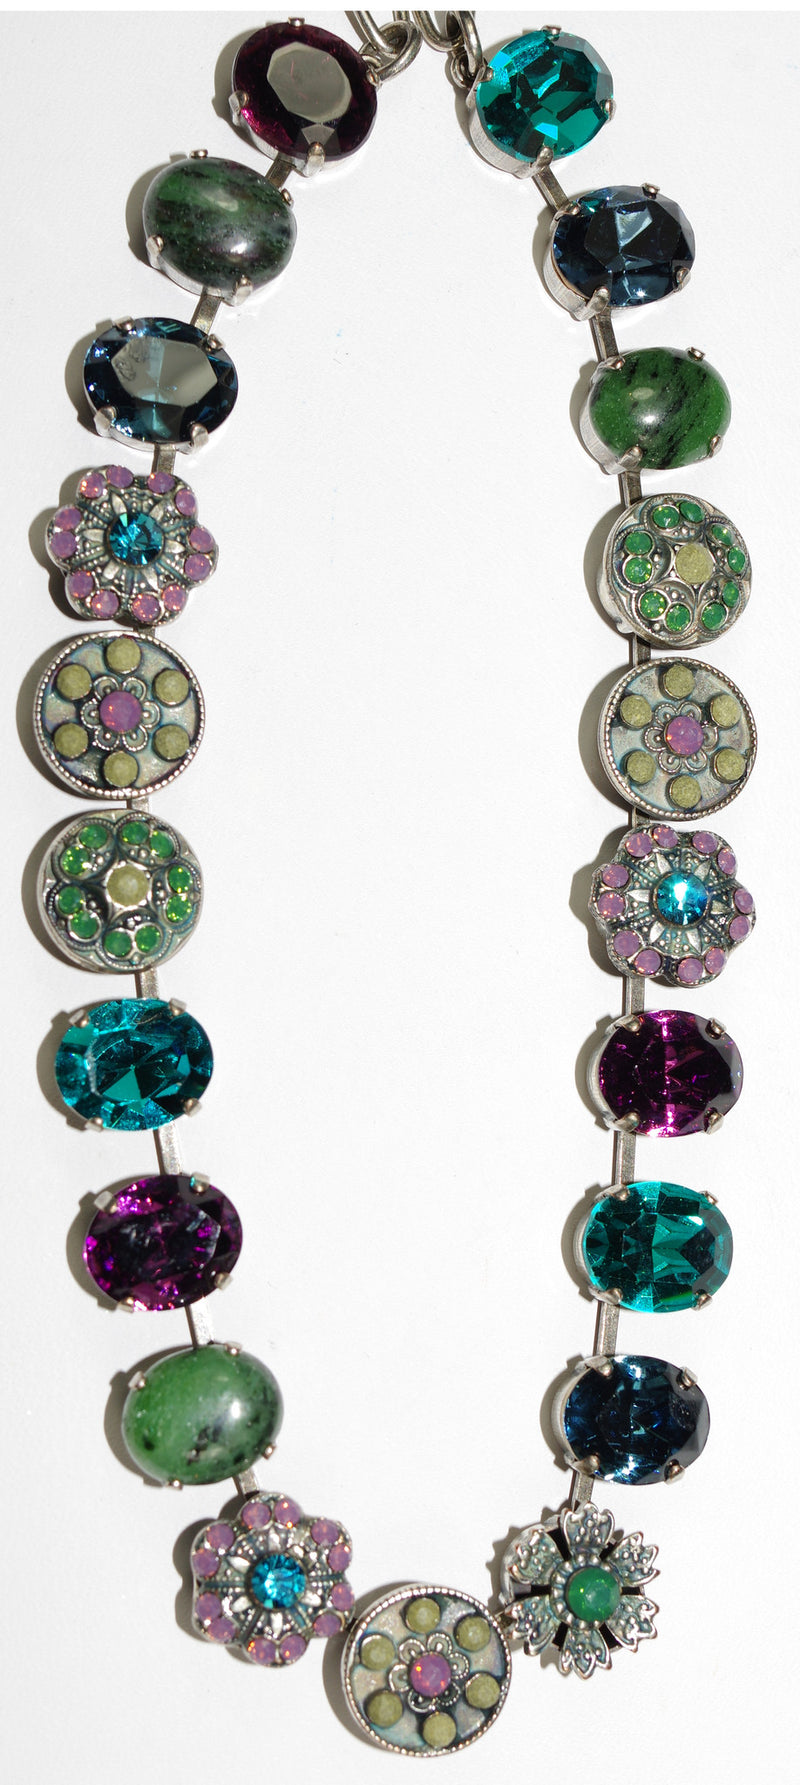 MARIANA NECKLACE PATIENCE: teal, purple, grey, green stones in silver setting, 18" adjustable chain